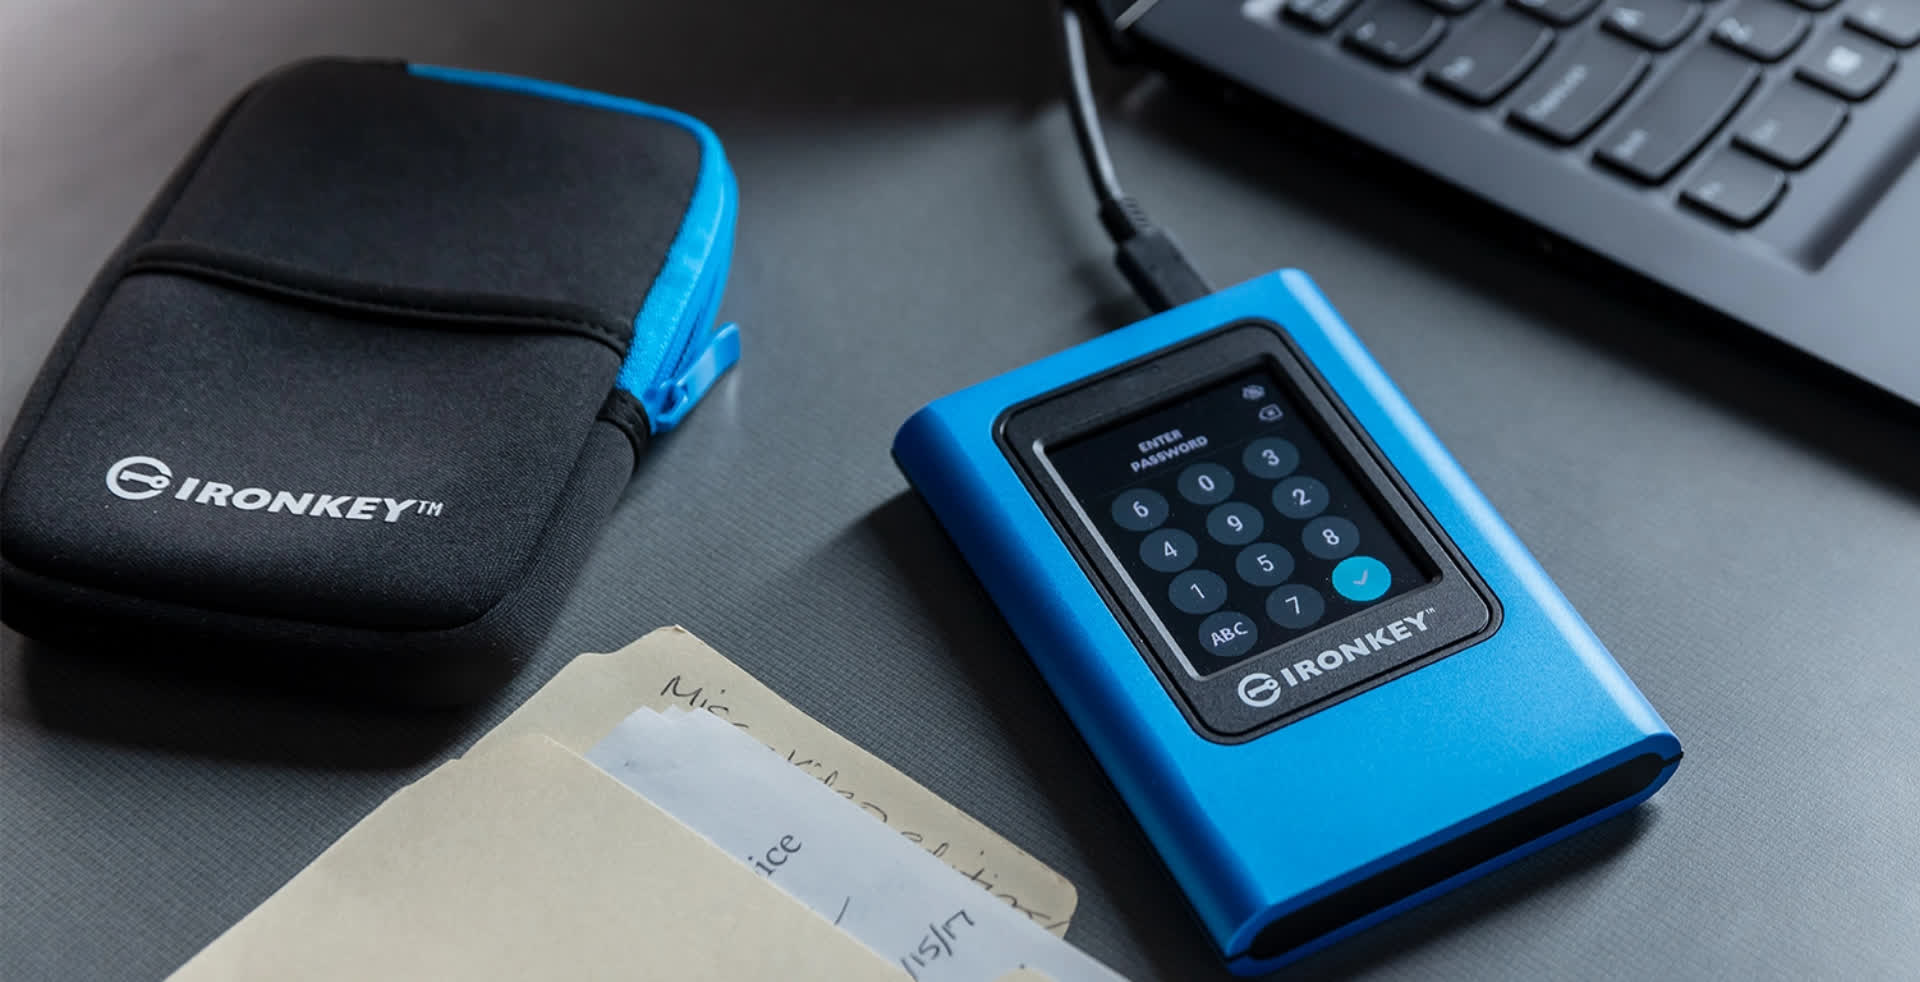 Kingston IronKey external SSD features a color touchscreen, built-in protection against brute-force attacks